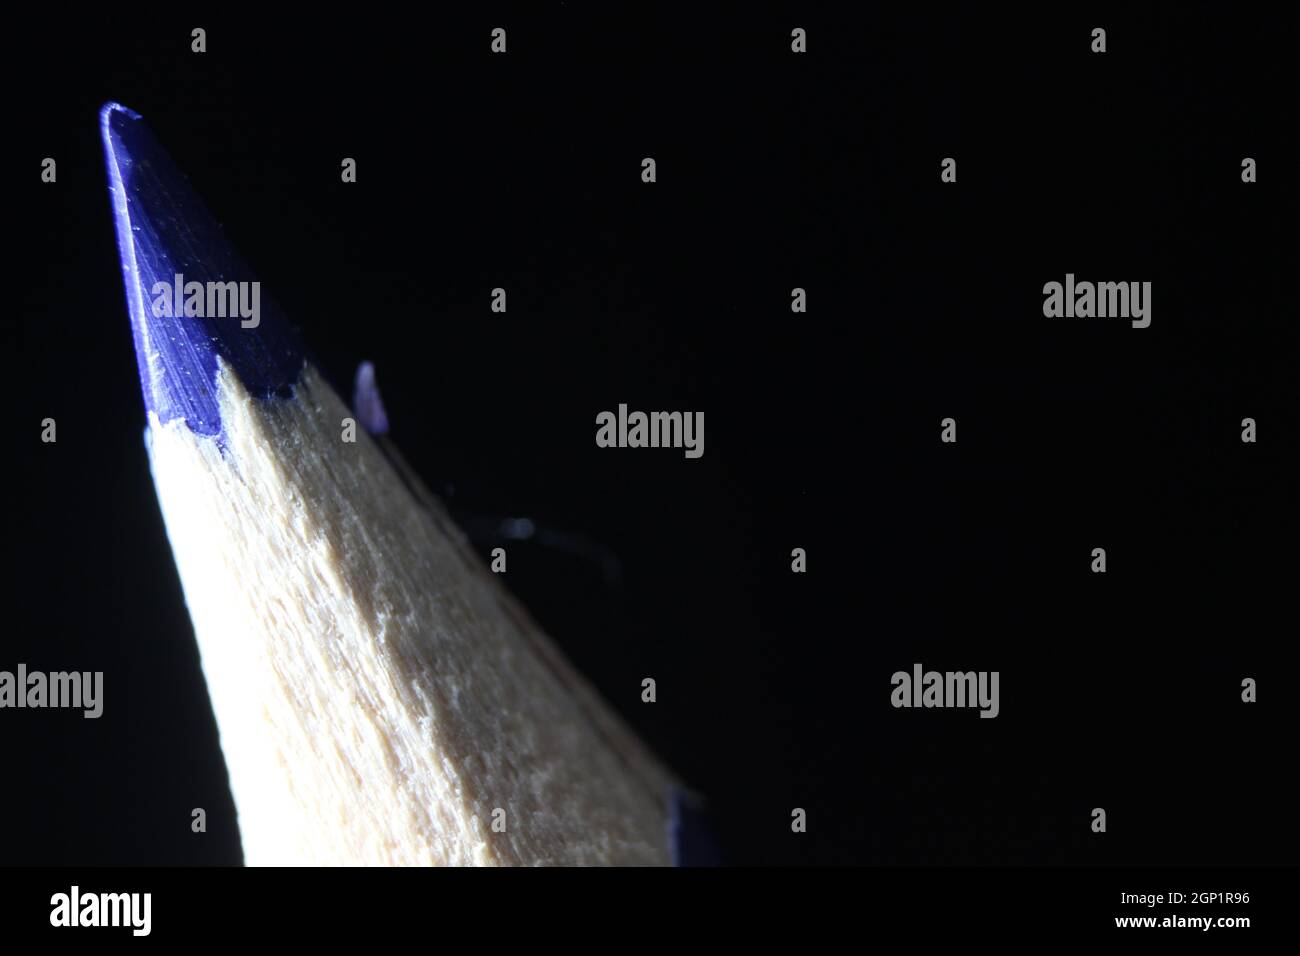 close up of sharpened pencil.Macro view of the tip of the pencil on a black background. Stock Photo